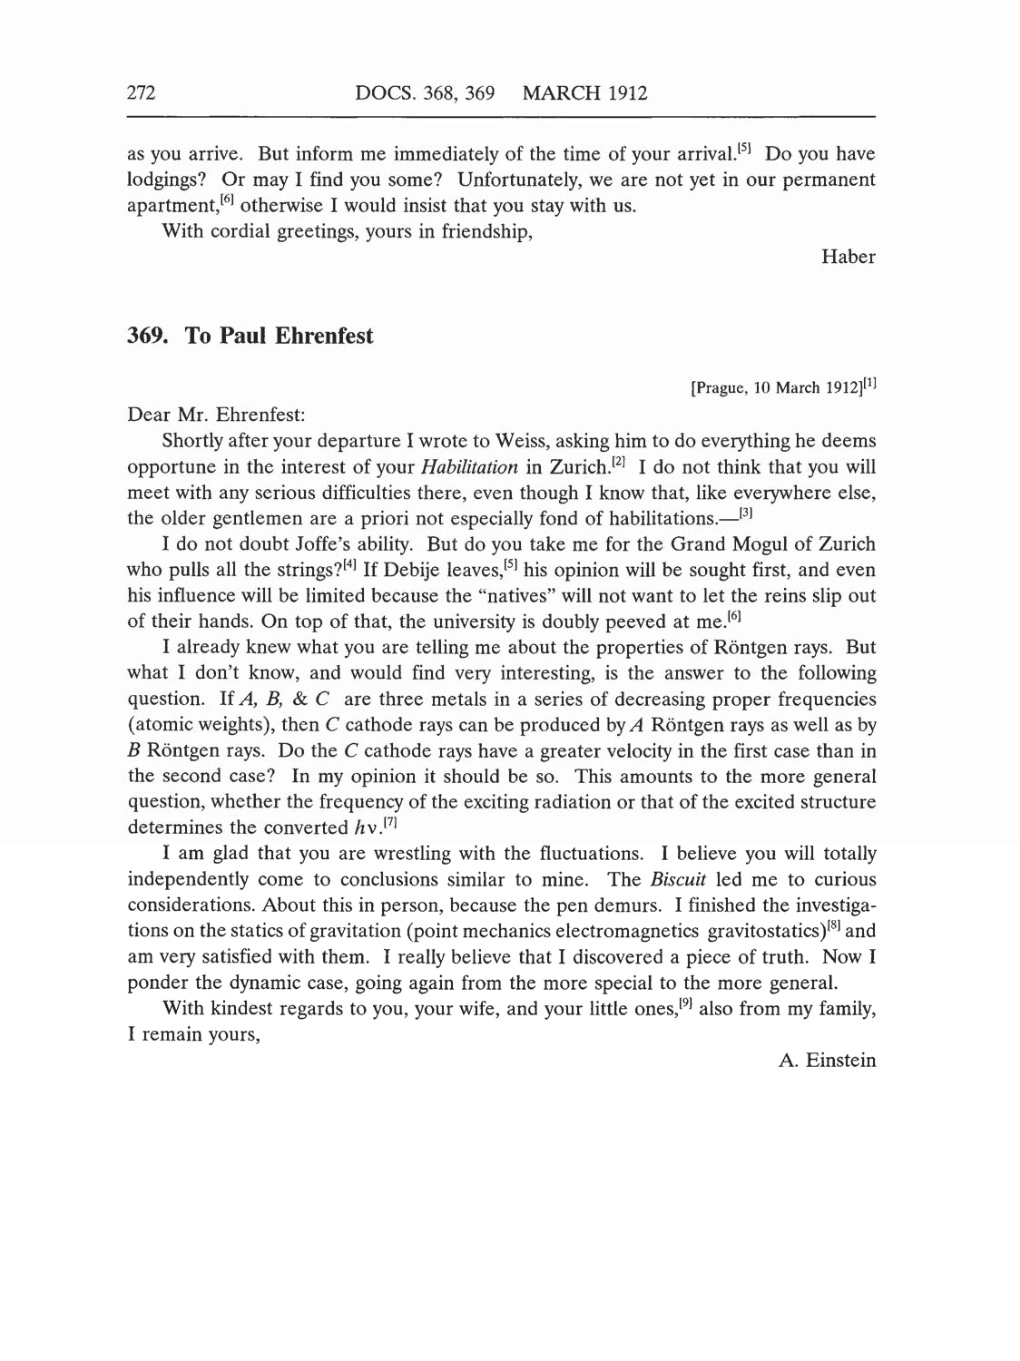 Volume 5: The Swiss Years: Correspondence, 1902-1914 (English translation supplement) page 272